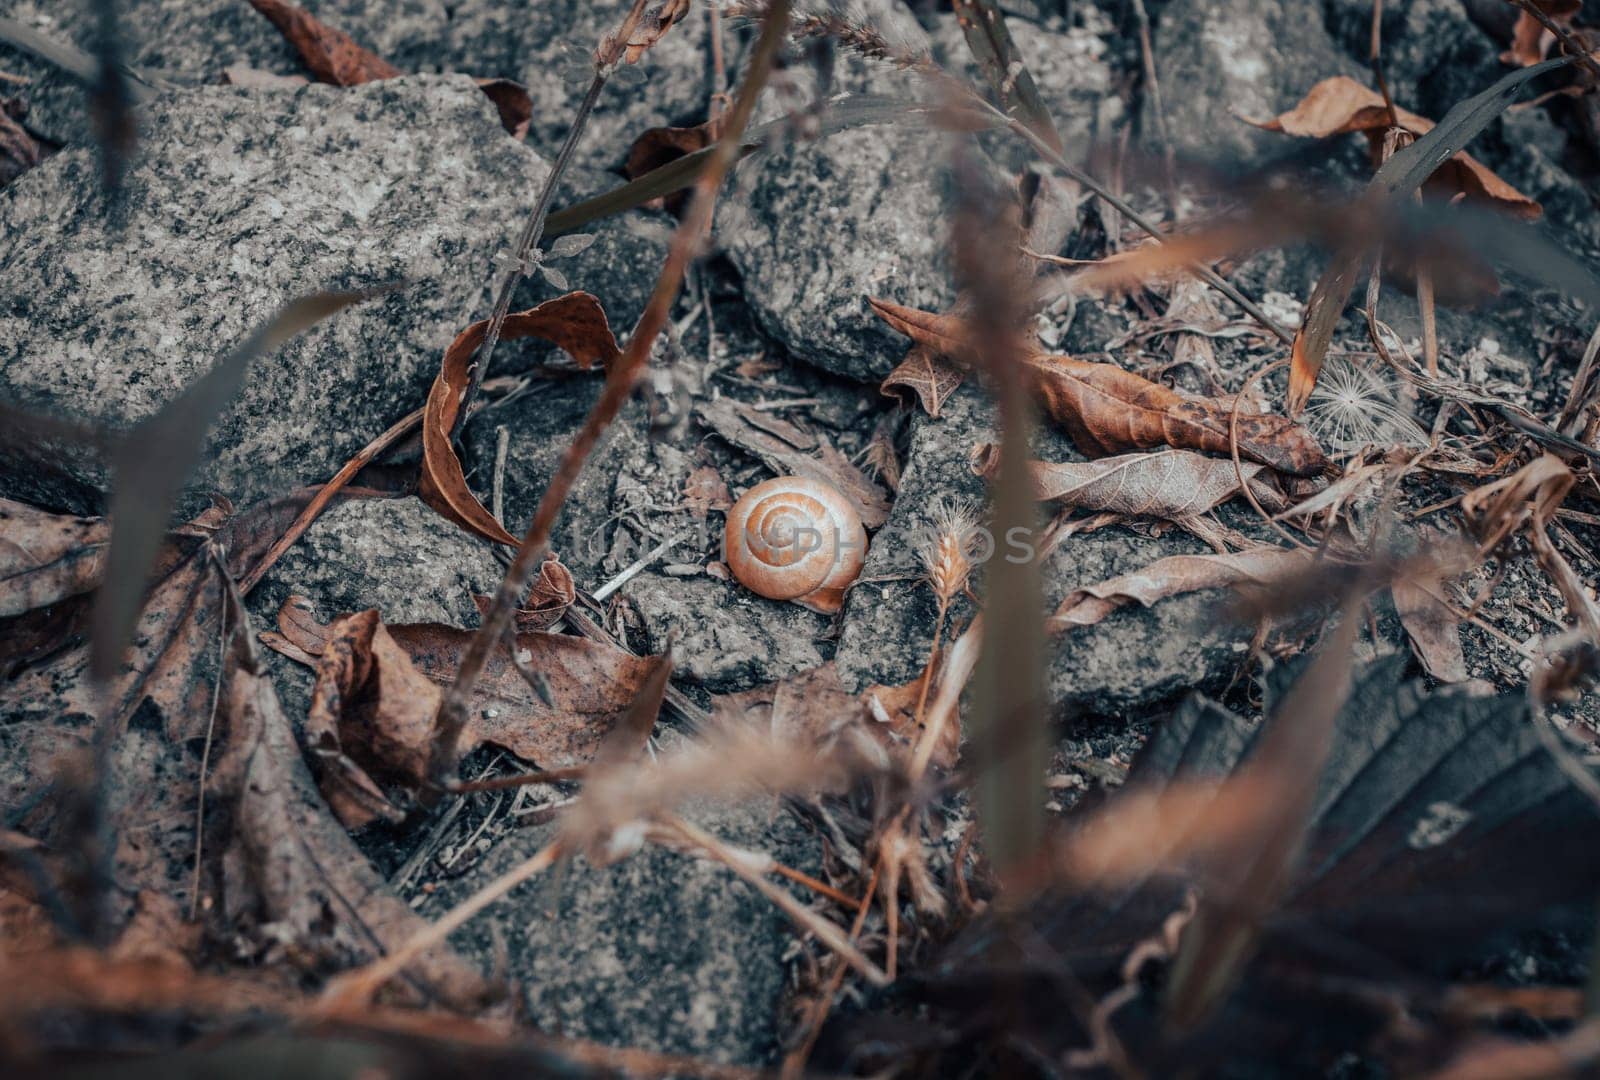 Close up of a garden snail sleeping on stone concept photo. Helix pomatia. Autumn atmosphere image. Beautiful nature scenery photography. High quality picture for wallpaper, travel blog.